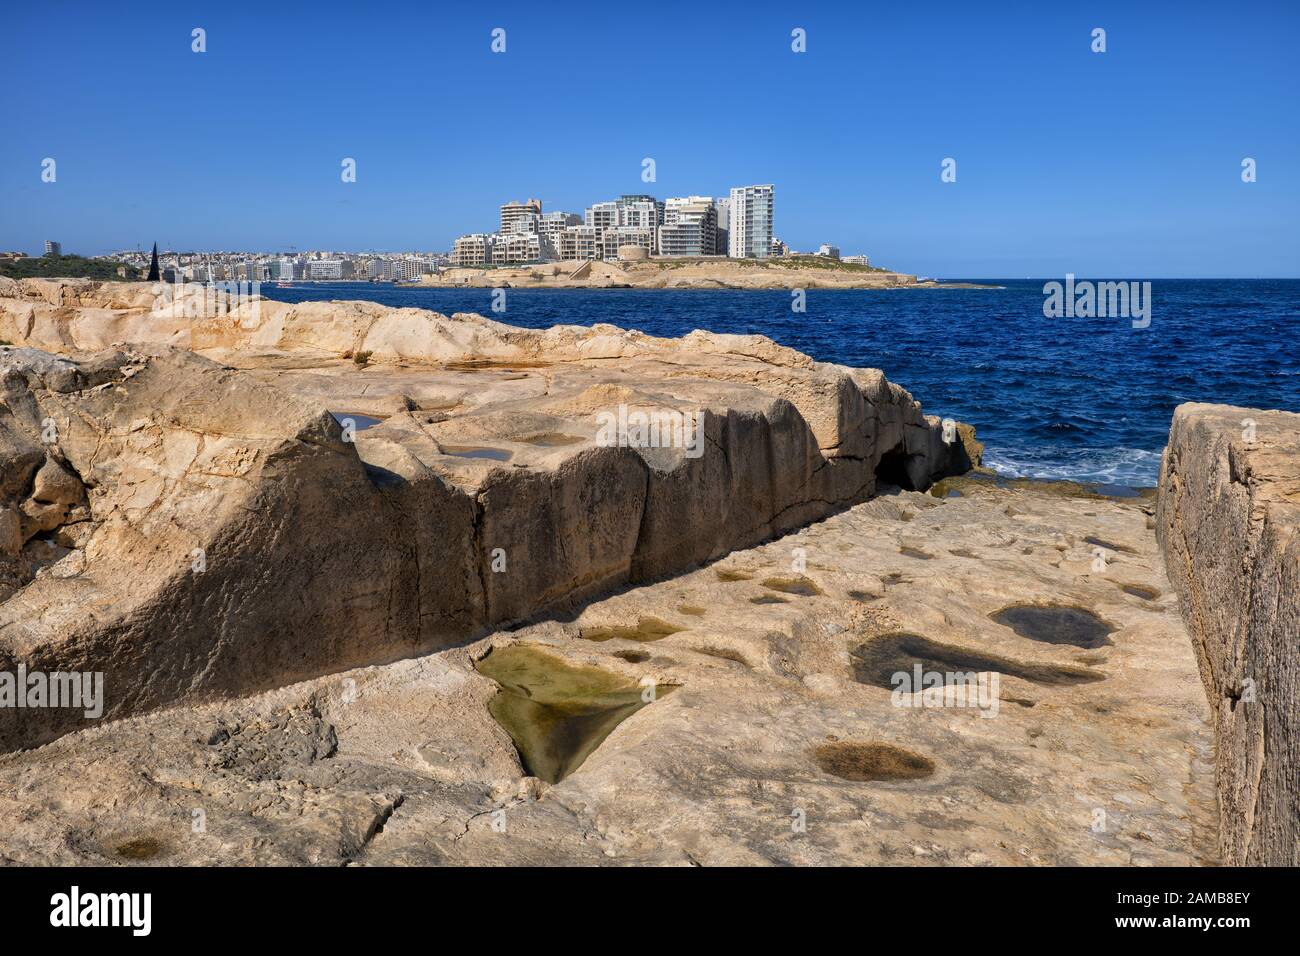 Valletta seaside in Malta, slipway (boat ramp or launch, boat deployer) to the sea carved in rocky shore with Sliema town on the horizon Stock Photo